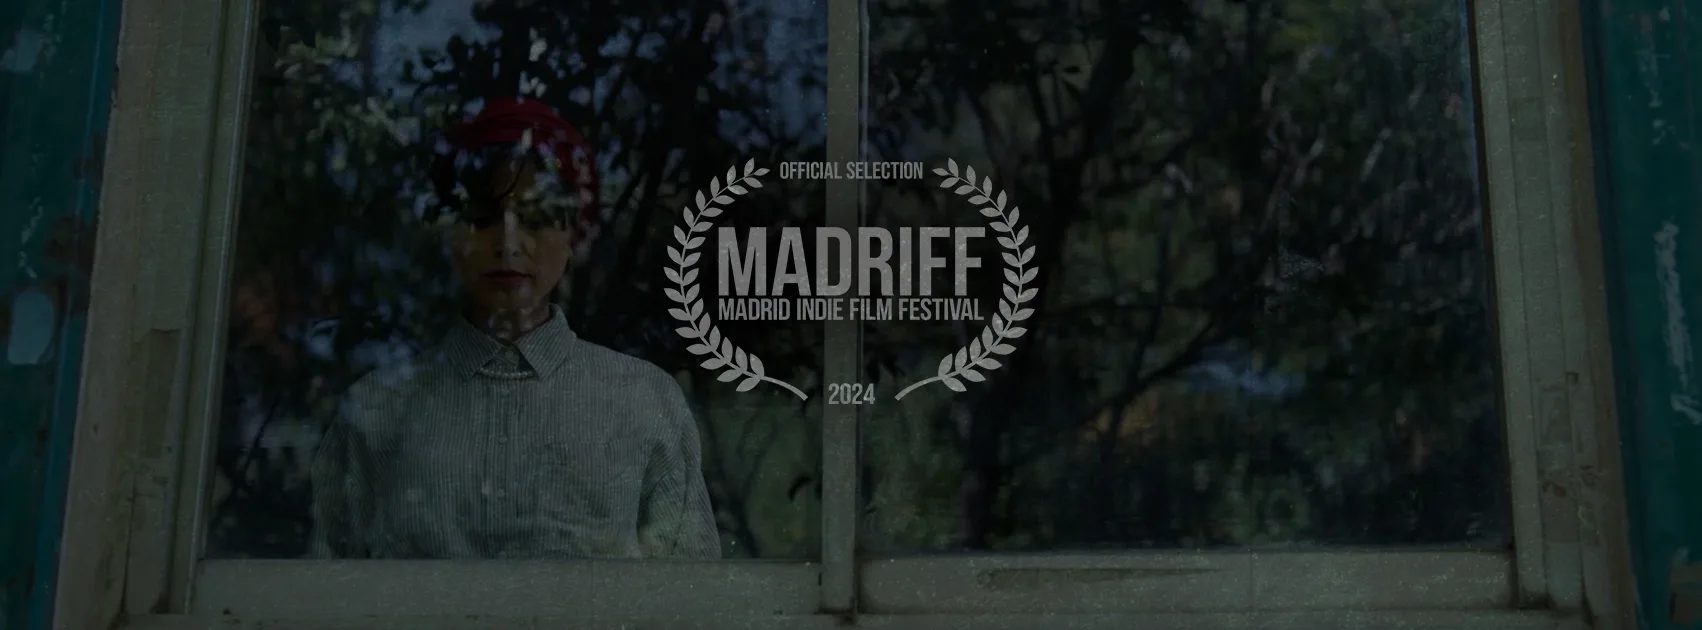 The short film "She was a star" by Neshat Shabani at MADRIFF - Madrid Indie Film Festival